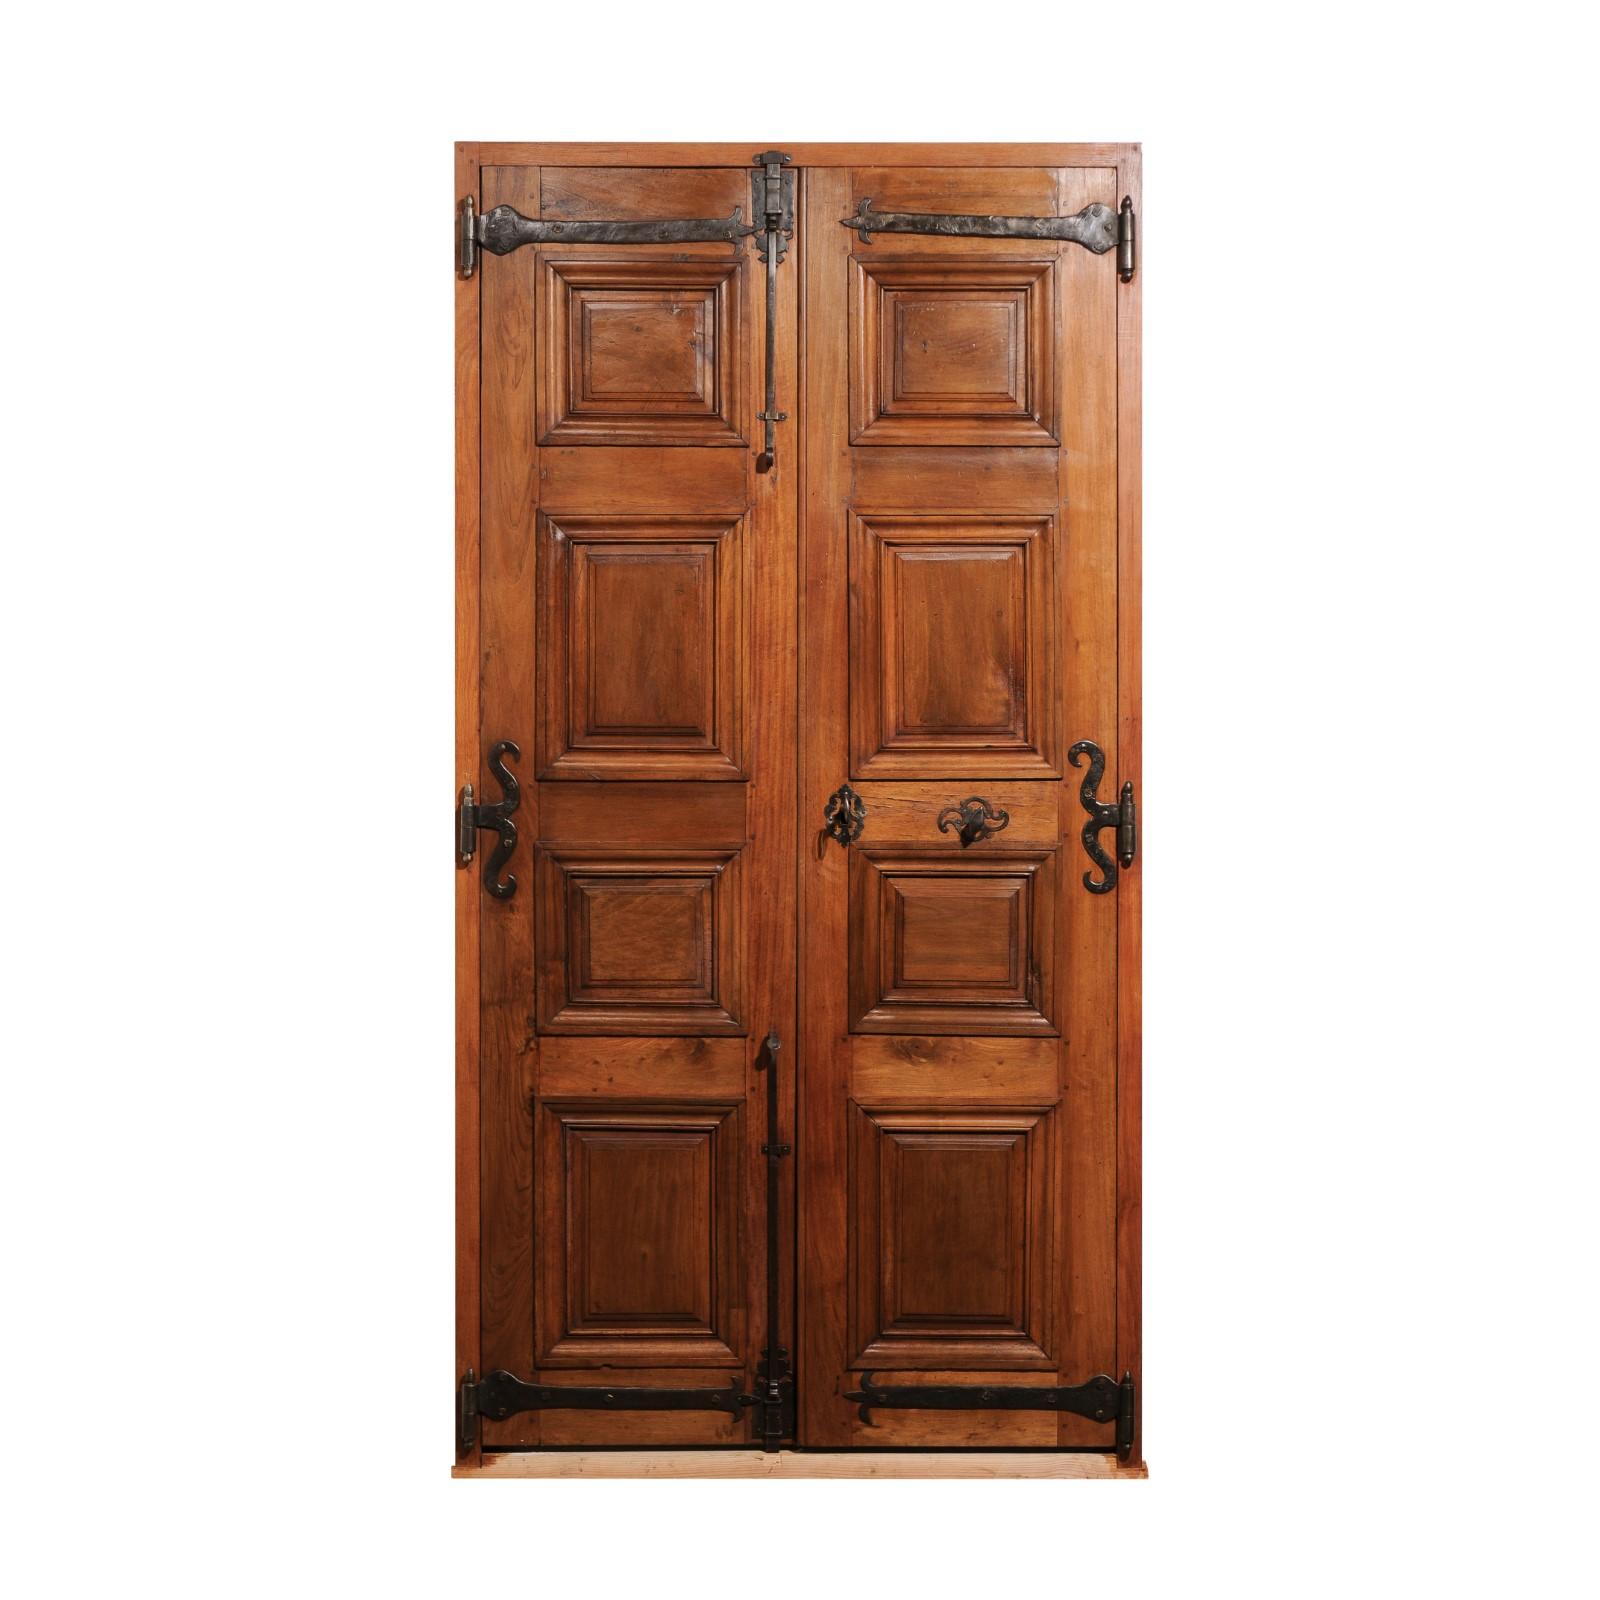 A pair of French Régence period walnut communication doors from the second quarter of the 18th century, with raised panels and iron hardware. Created in France during short Régence period which saw the transition of power between the Sun King and